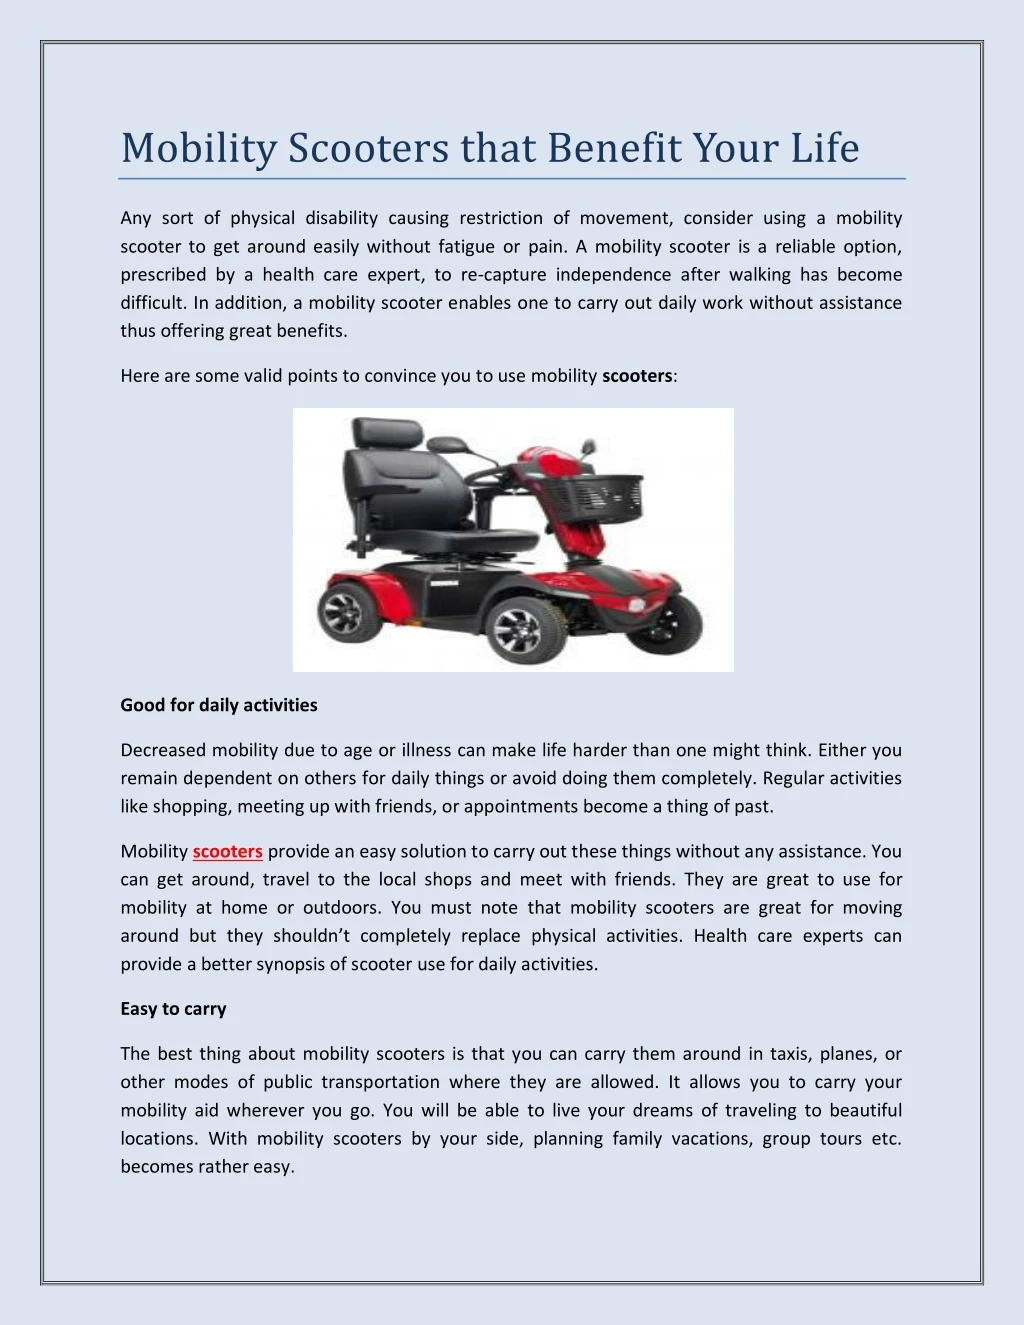 mobility scooters that benefit your life